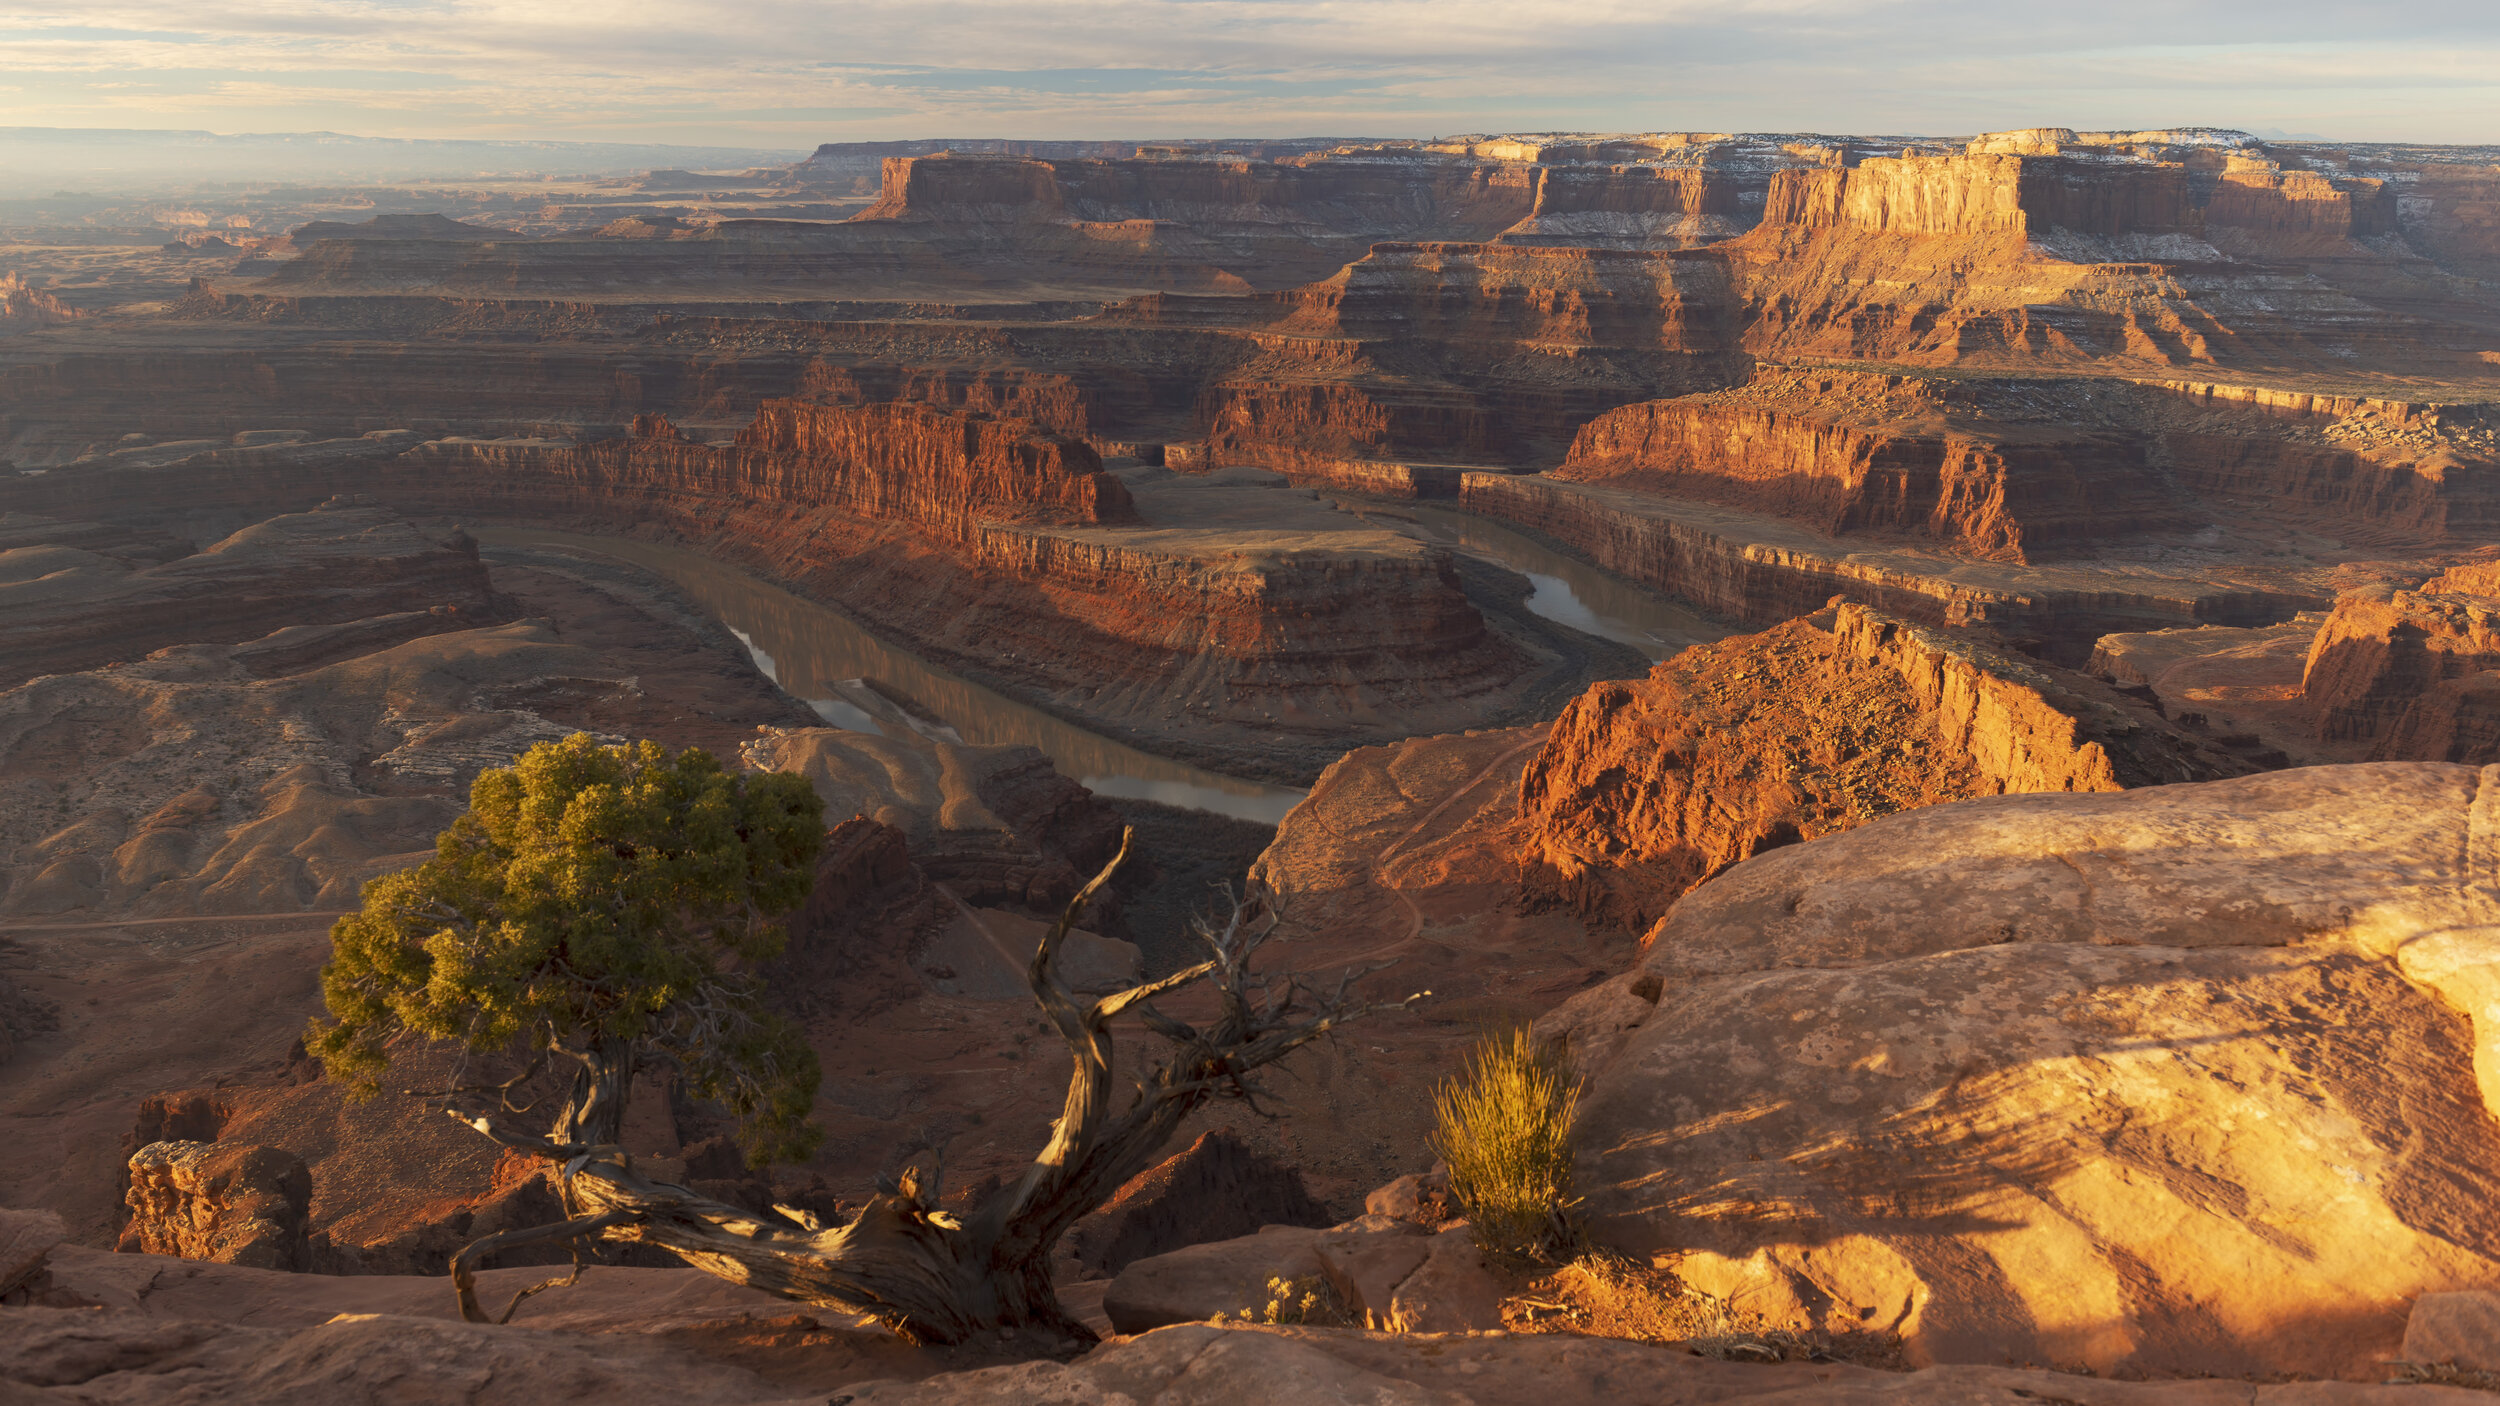 Sunrise at Dead Horse Point SP